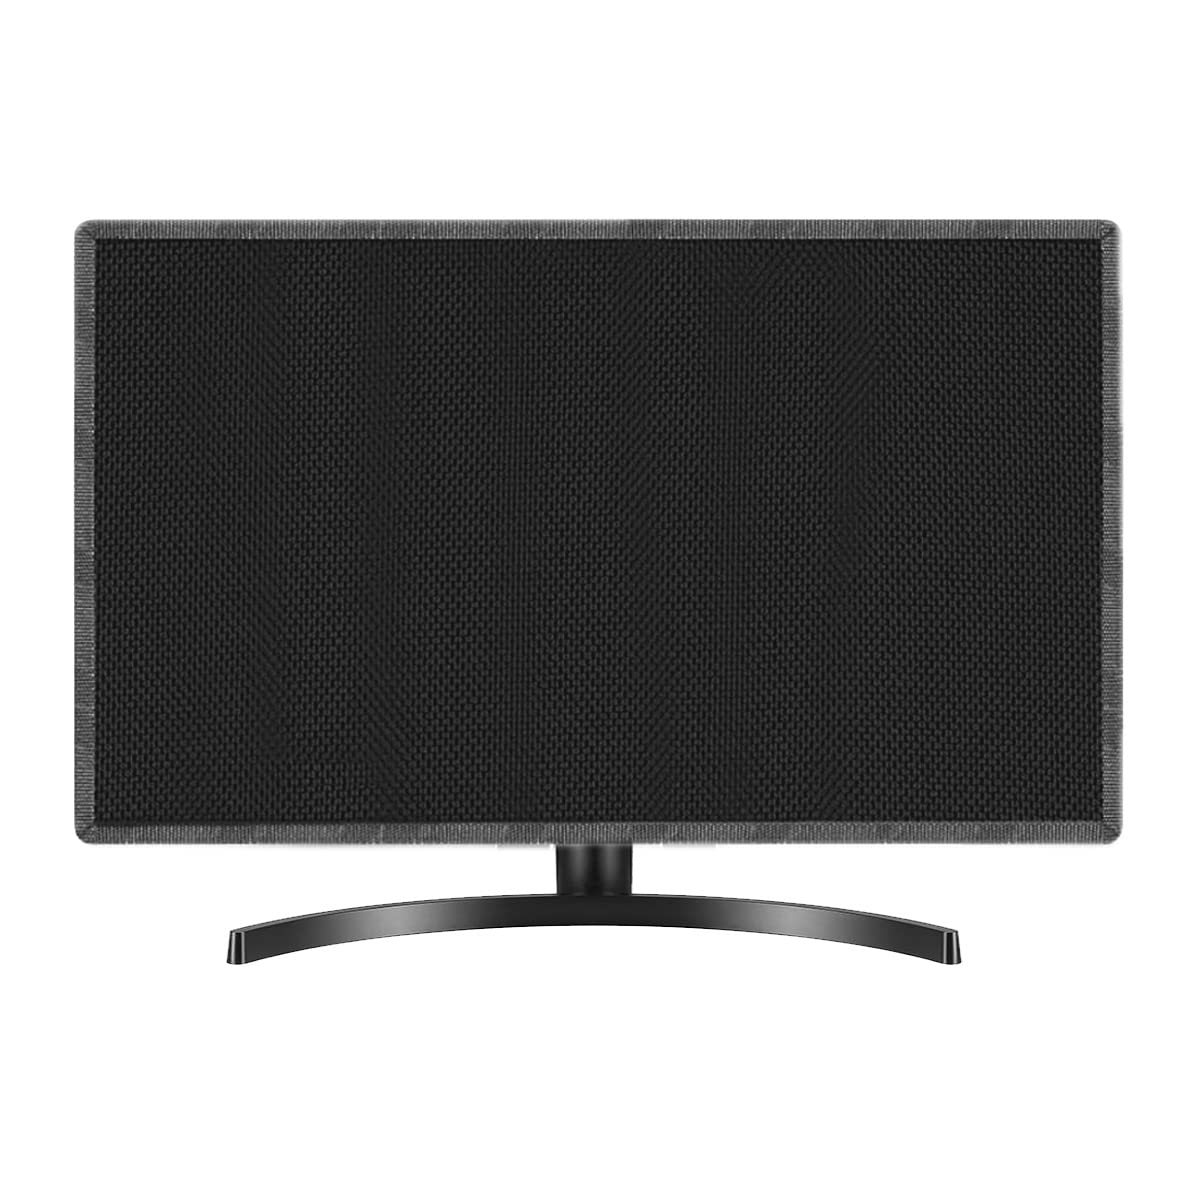 PalaP Super Premium Dust Proof Monitor Cover for ACER 19.5 inches Monitor (Black)